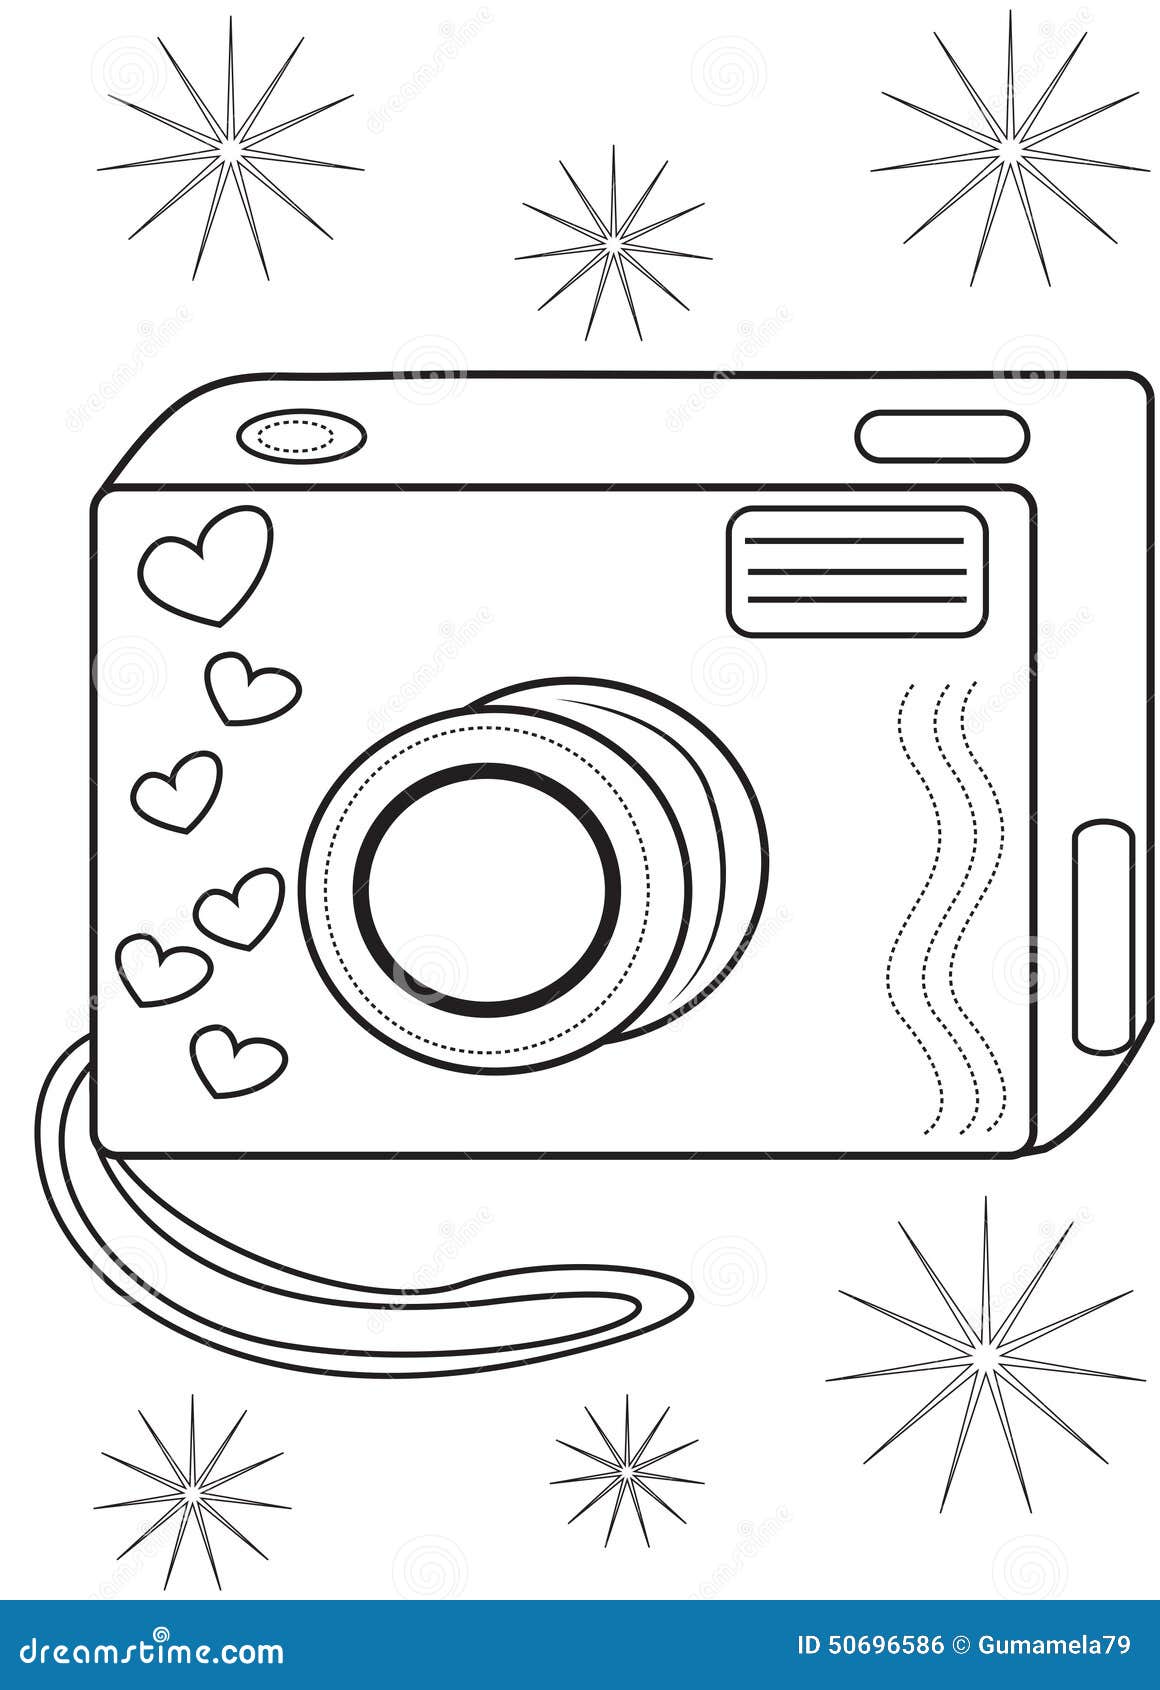 Camera coloring page stock illustration. Illustration of elements